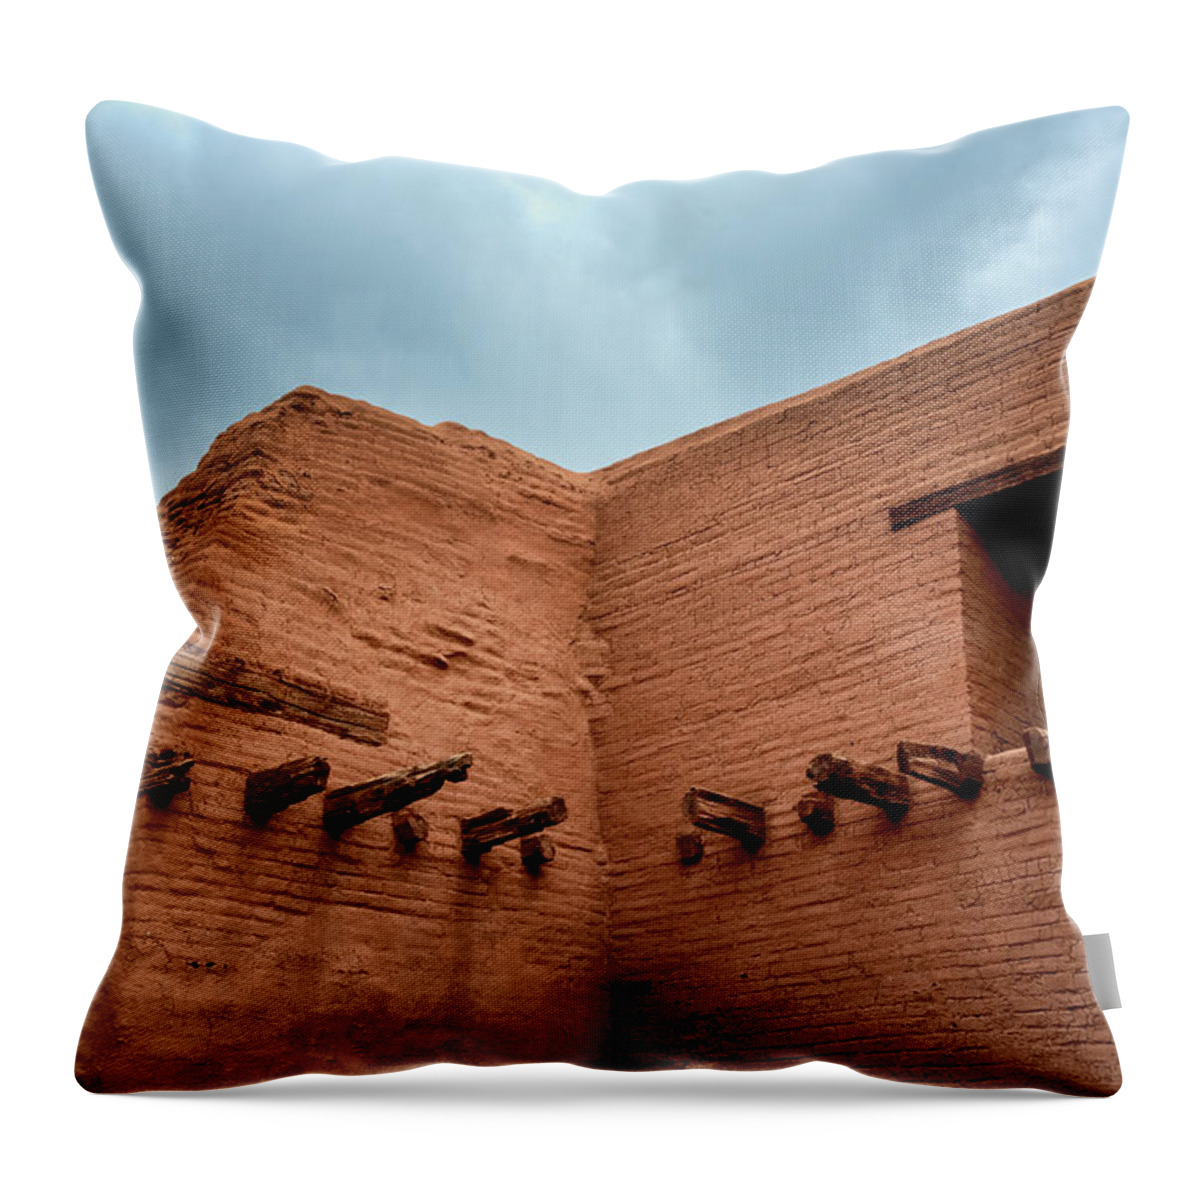 Pecos Throw Pillow featuring the photograph Pecos Timbered Ruins by James Barber